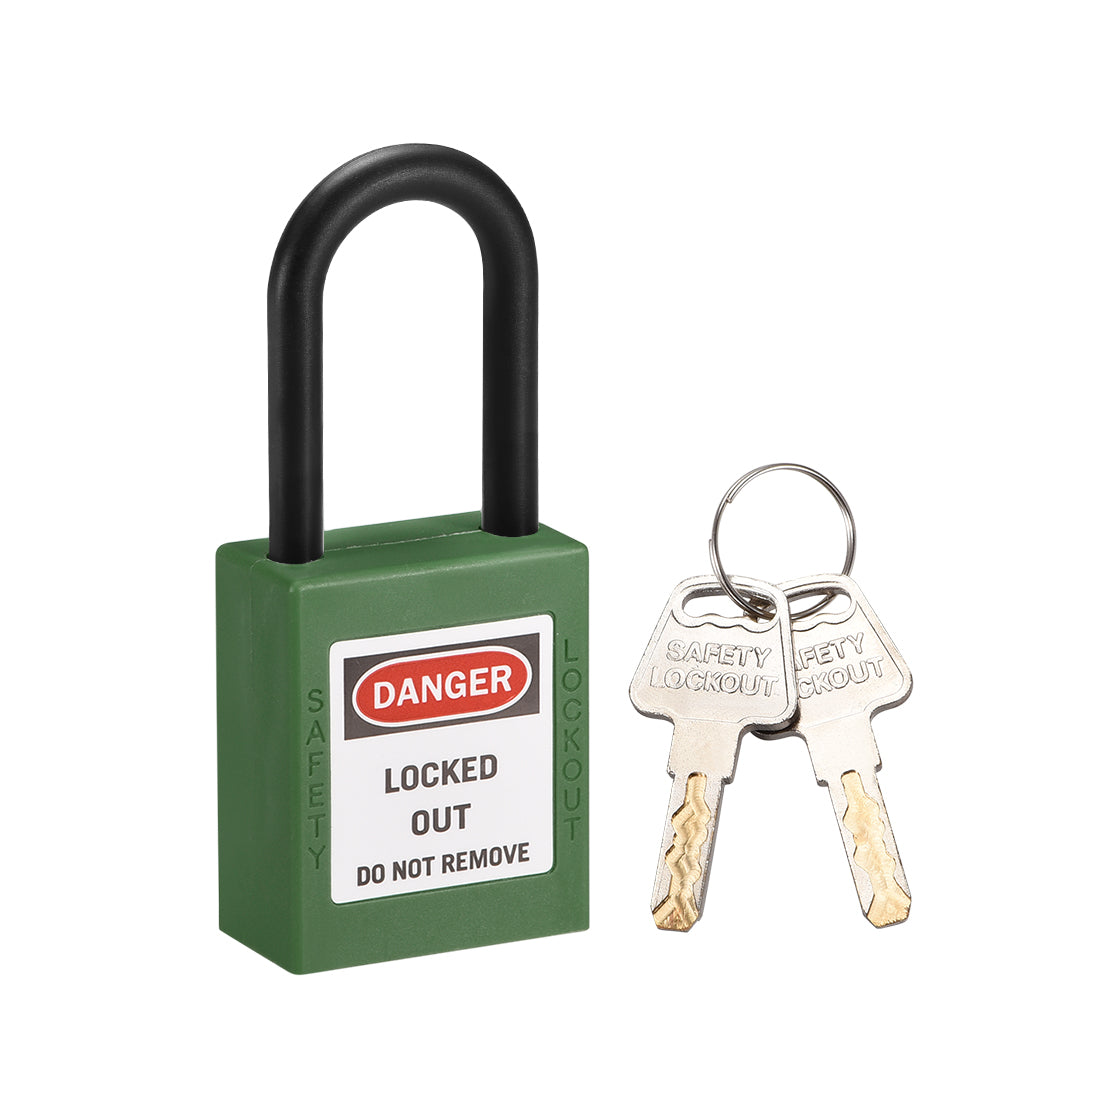 uxcell Uxcell Lockout Tagout Safety Padlock 38mm Nylon Shackle Keyed Different Green